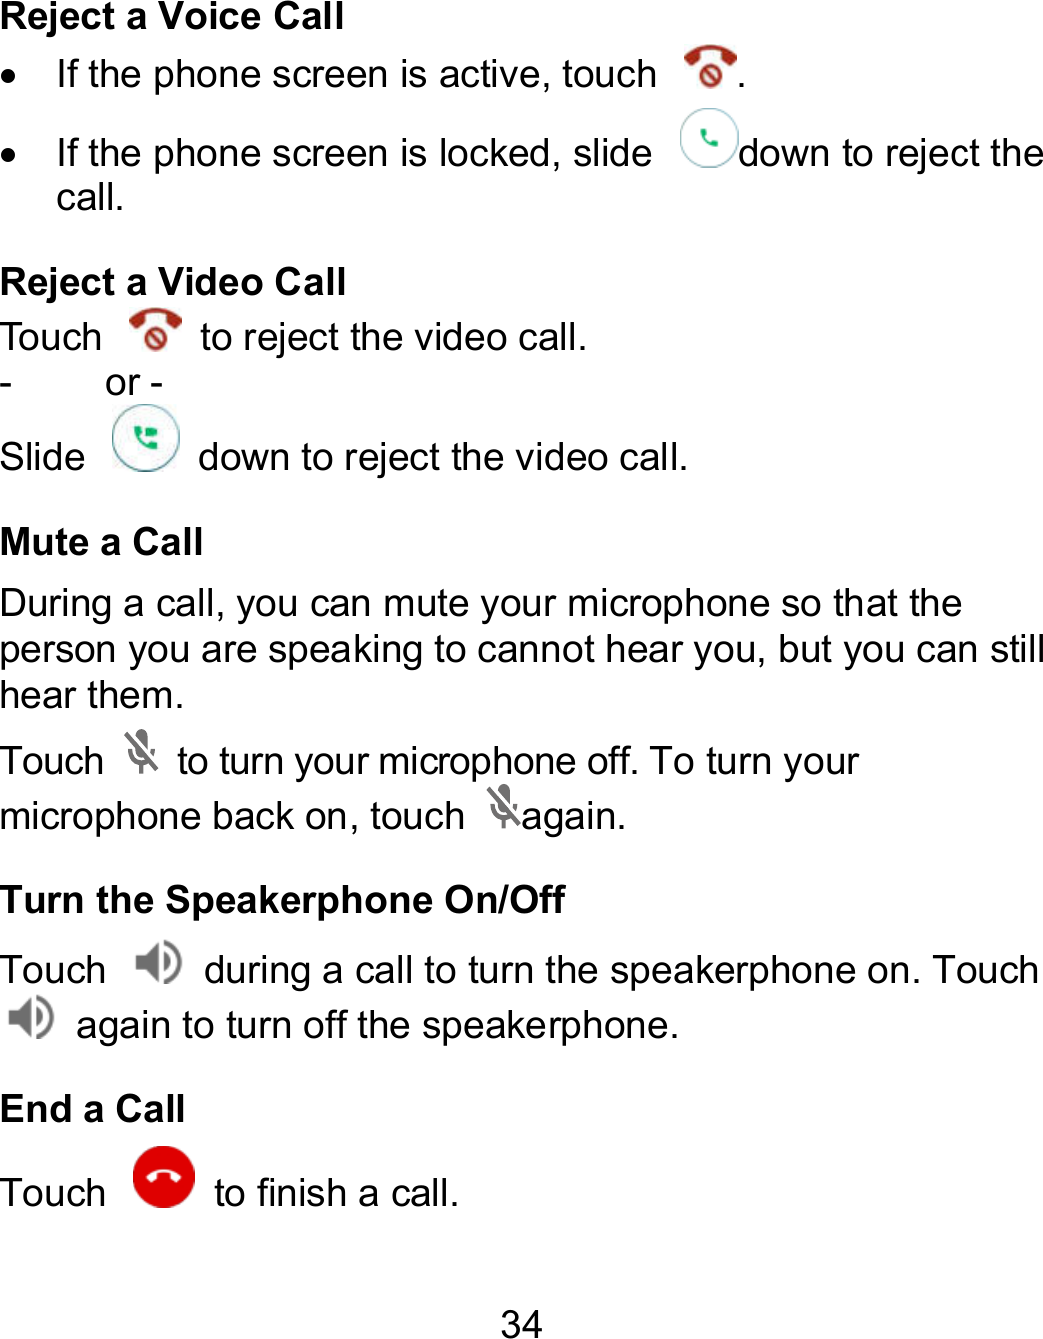 34 Reject a Voice Call   If the phone screen is active, touch  .   If the phone screen is locked, slide  down to reject the call. Reject a Video Call Touch    to reject the video call. -    or - Slide    down to reject the video call. Mute a Call During a call, you can mute your microphone so that the person you are speaking to cannot hear you, but you can still hear them. Touch    to turn your microphone off. To turn your microphone back on, touch  again. Turn the Speakerphone On/Off Touch    during a call to turn the speakerphone on. Touch   again to turn off the speakerphone.   End a Call Touch    to finish a call.         to reject the During a call, you can mute your microphone so that the speaking to cannot hear you, but you can still o turn the speakerphone on. Touch 